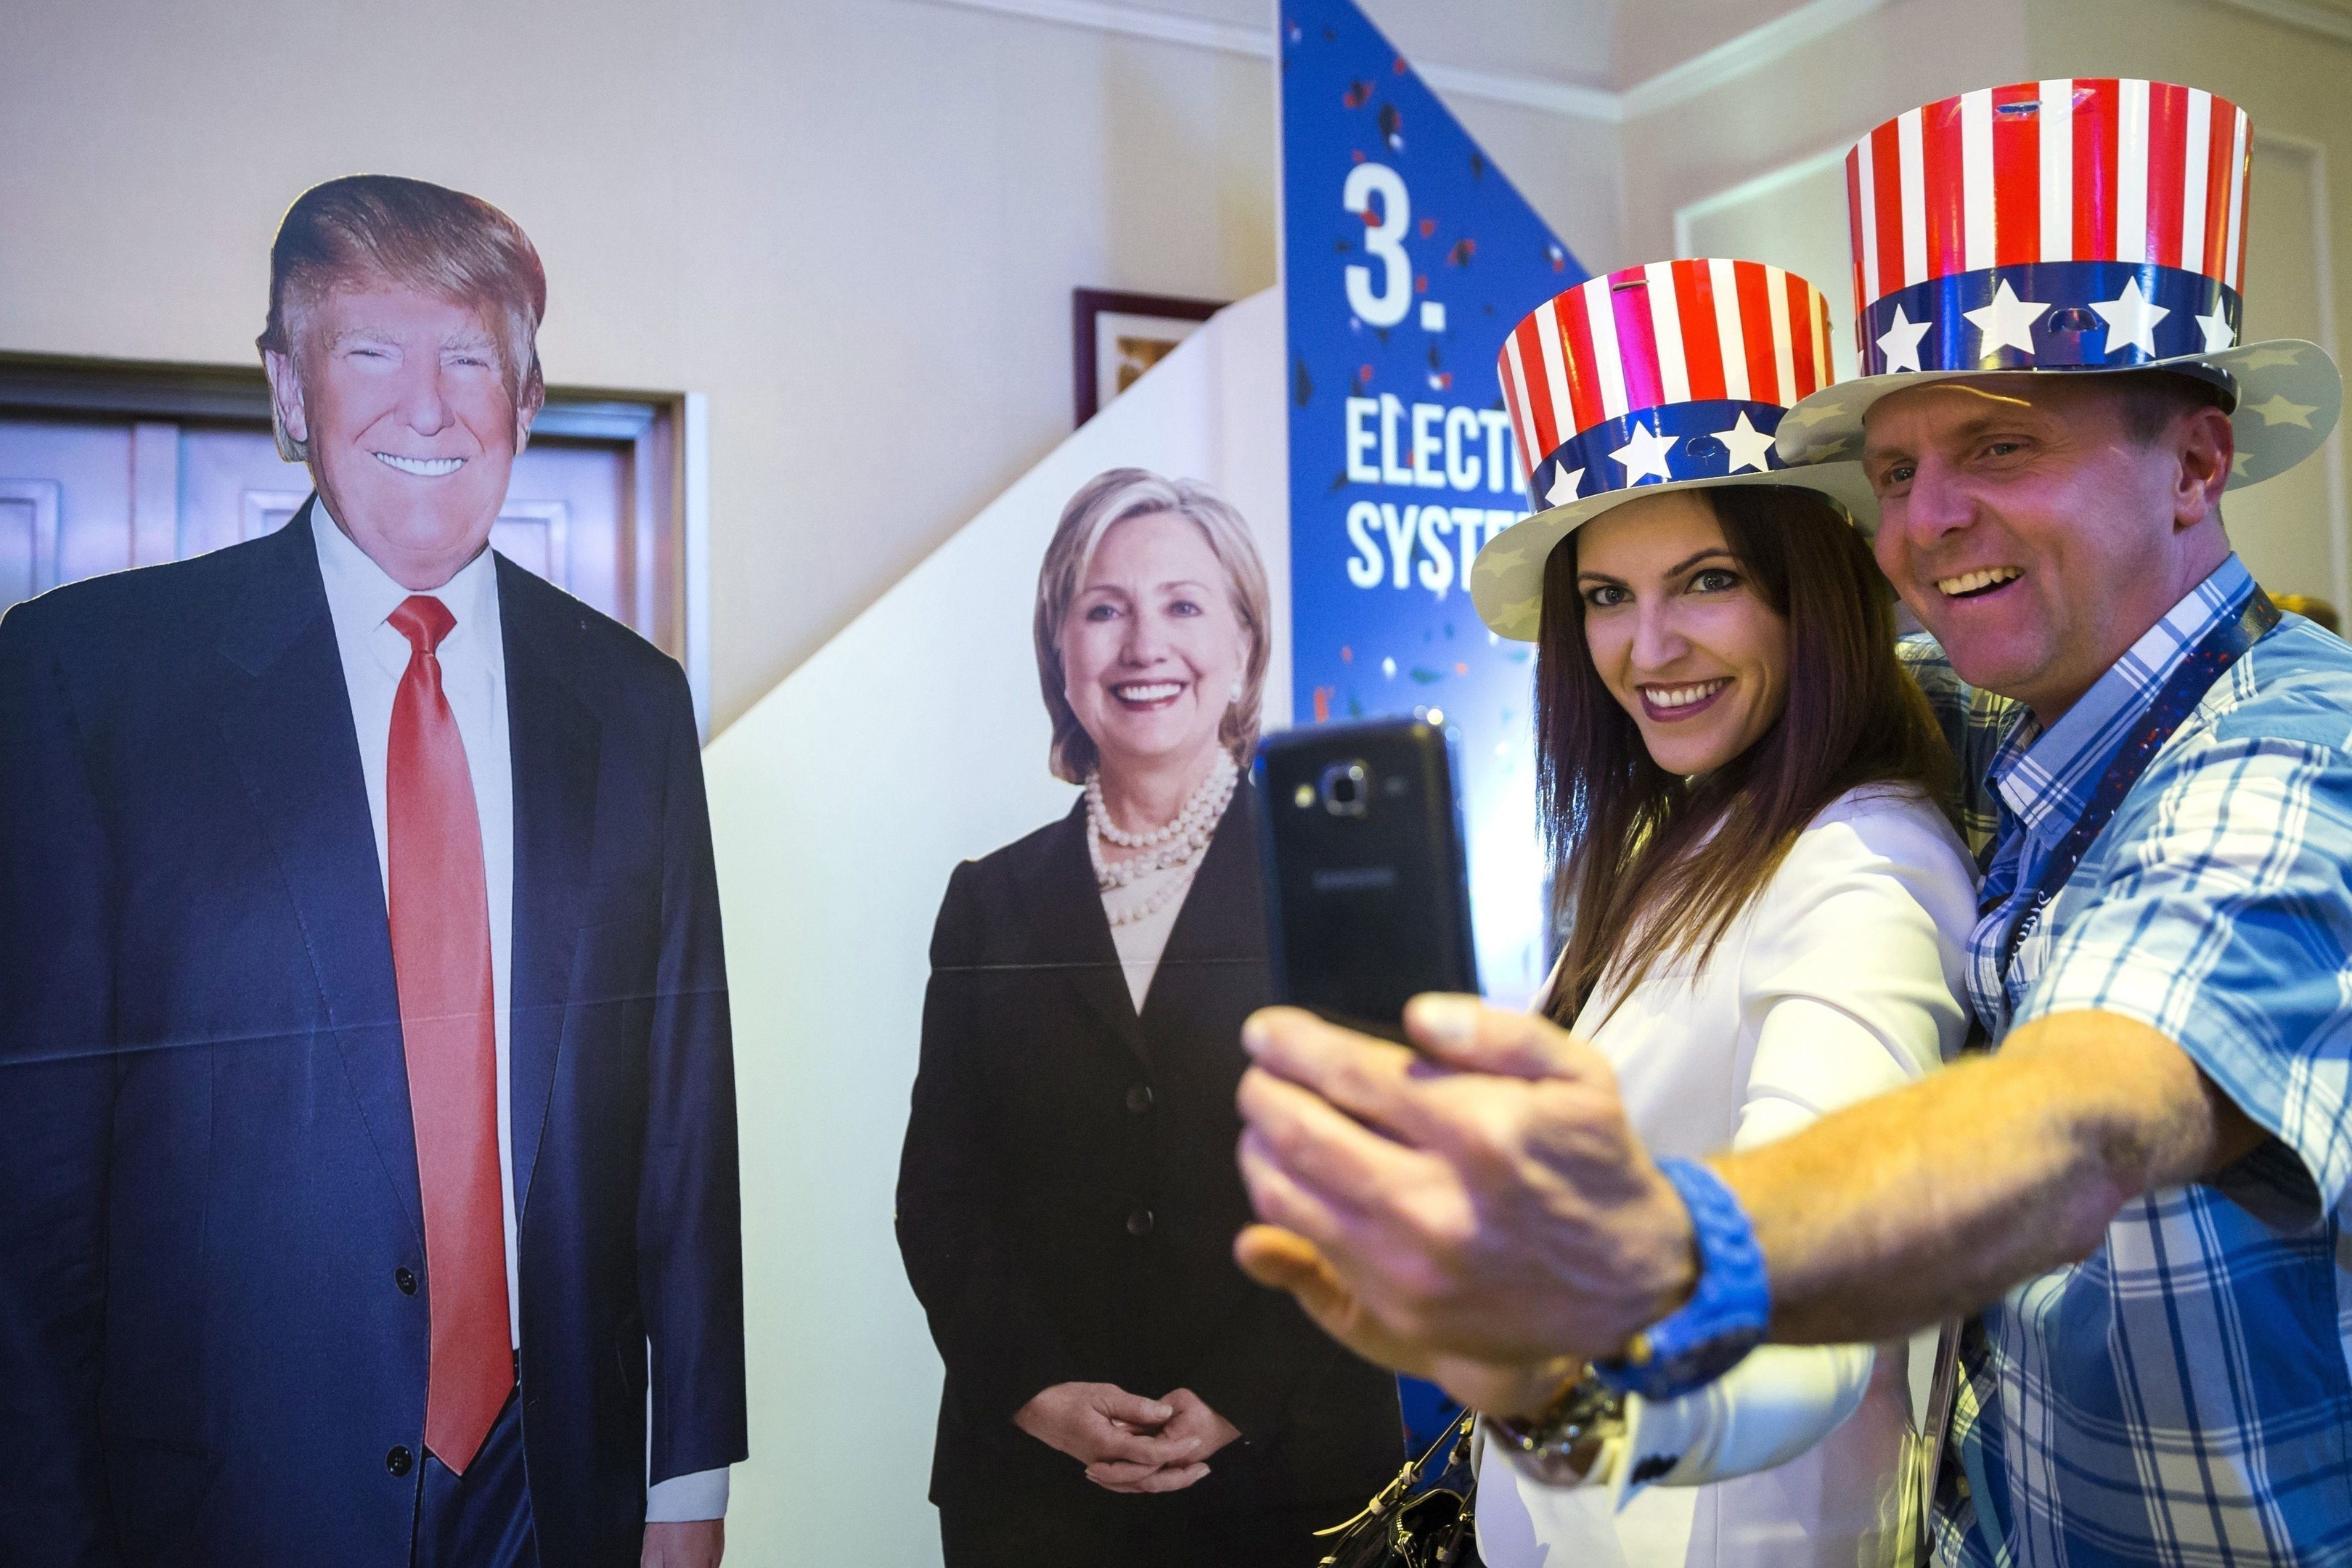 People in patriotic top hats take photographs next to cardboard figures depicting Donald Trump the Republican, left, and Hillary Clinton, the Democratic presidential candidates, during the Election Night Party at the US Embassy in Budapest, Hungary, Tuesday, Nov. 8, 2016. (Balazs Mohai/MTI via AP)